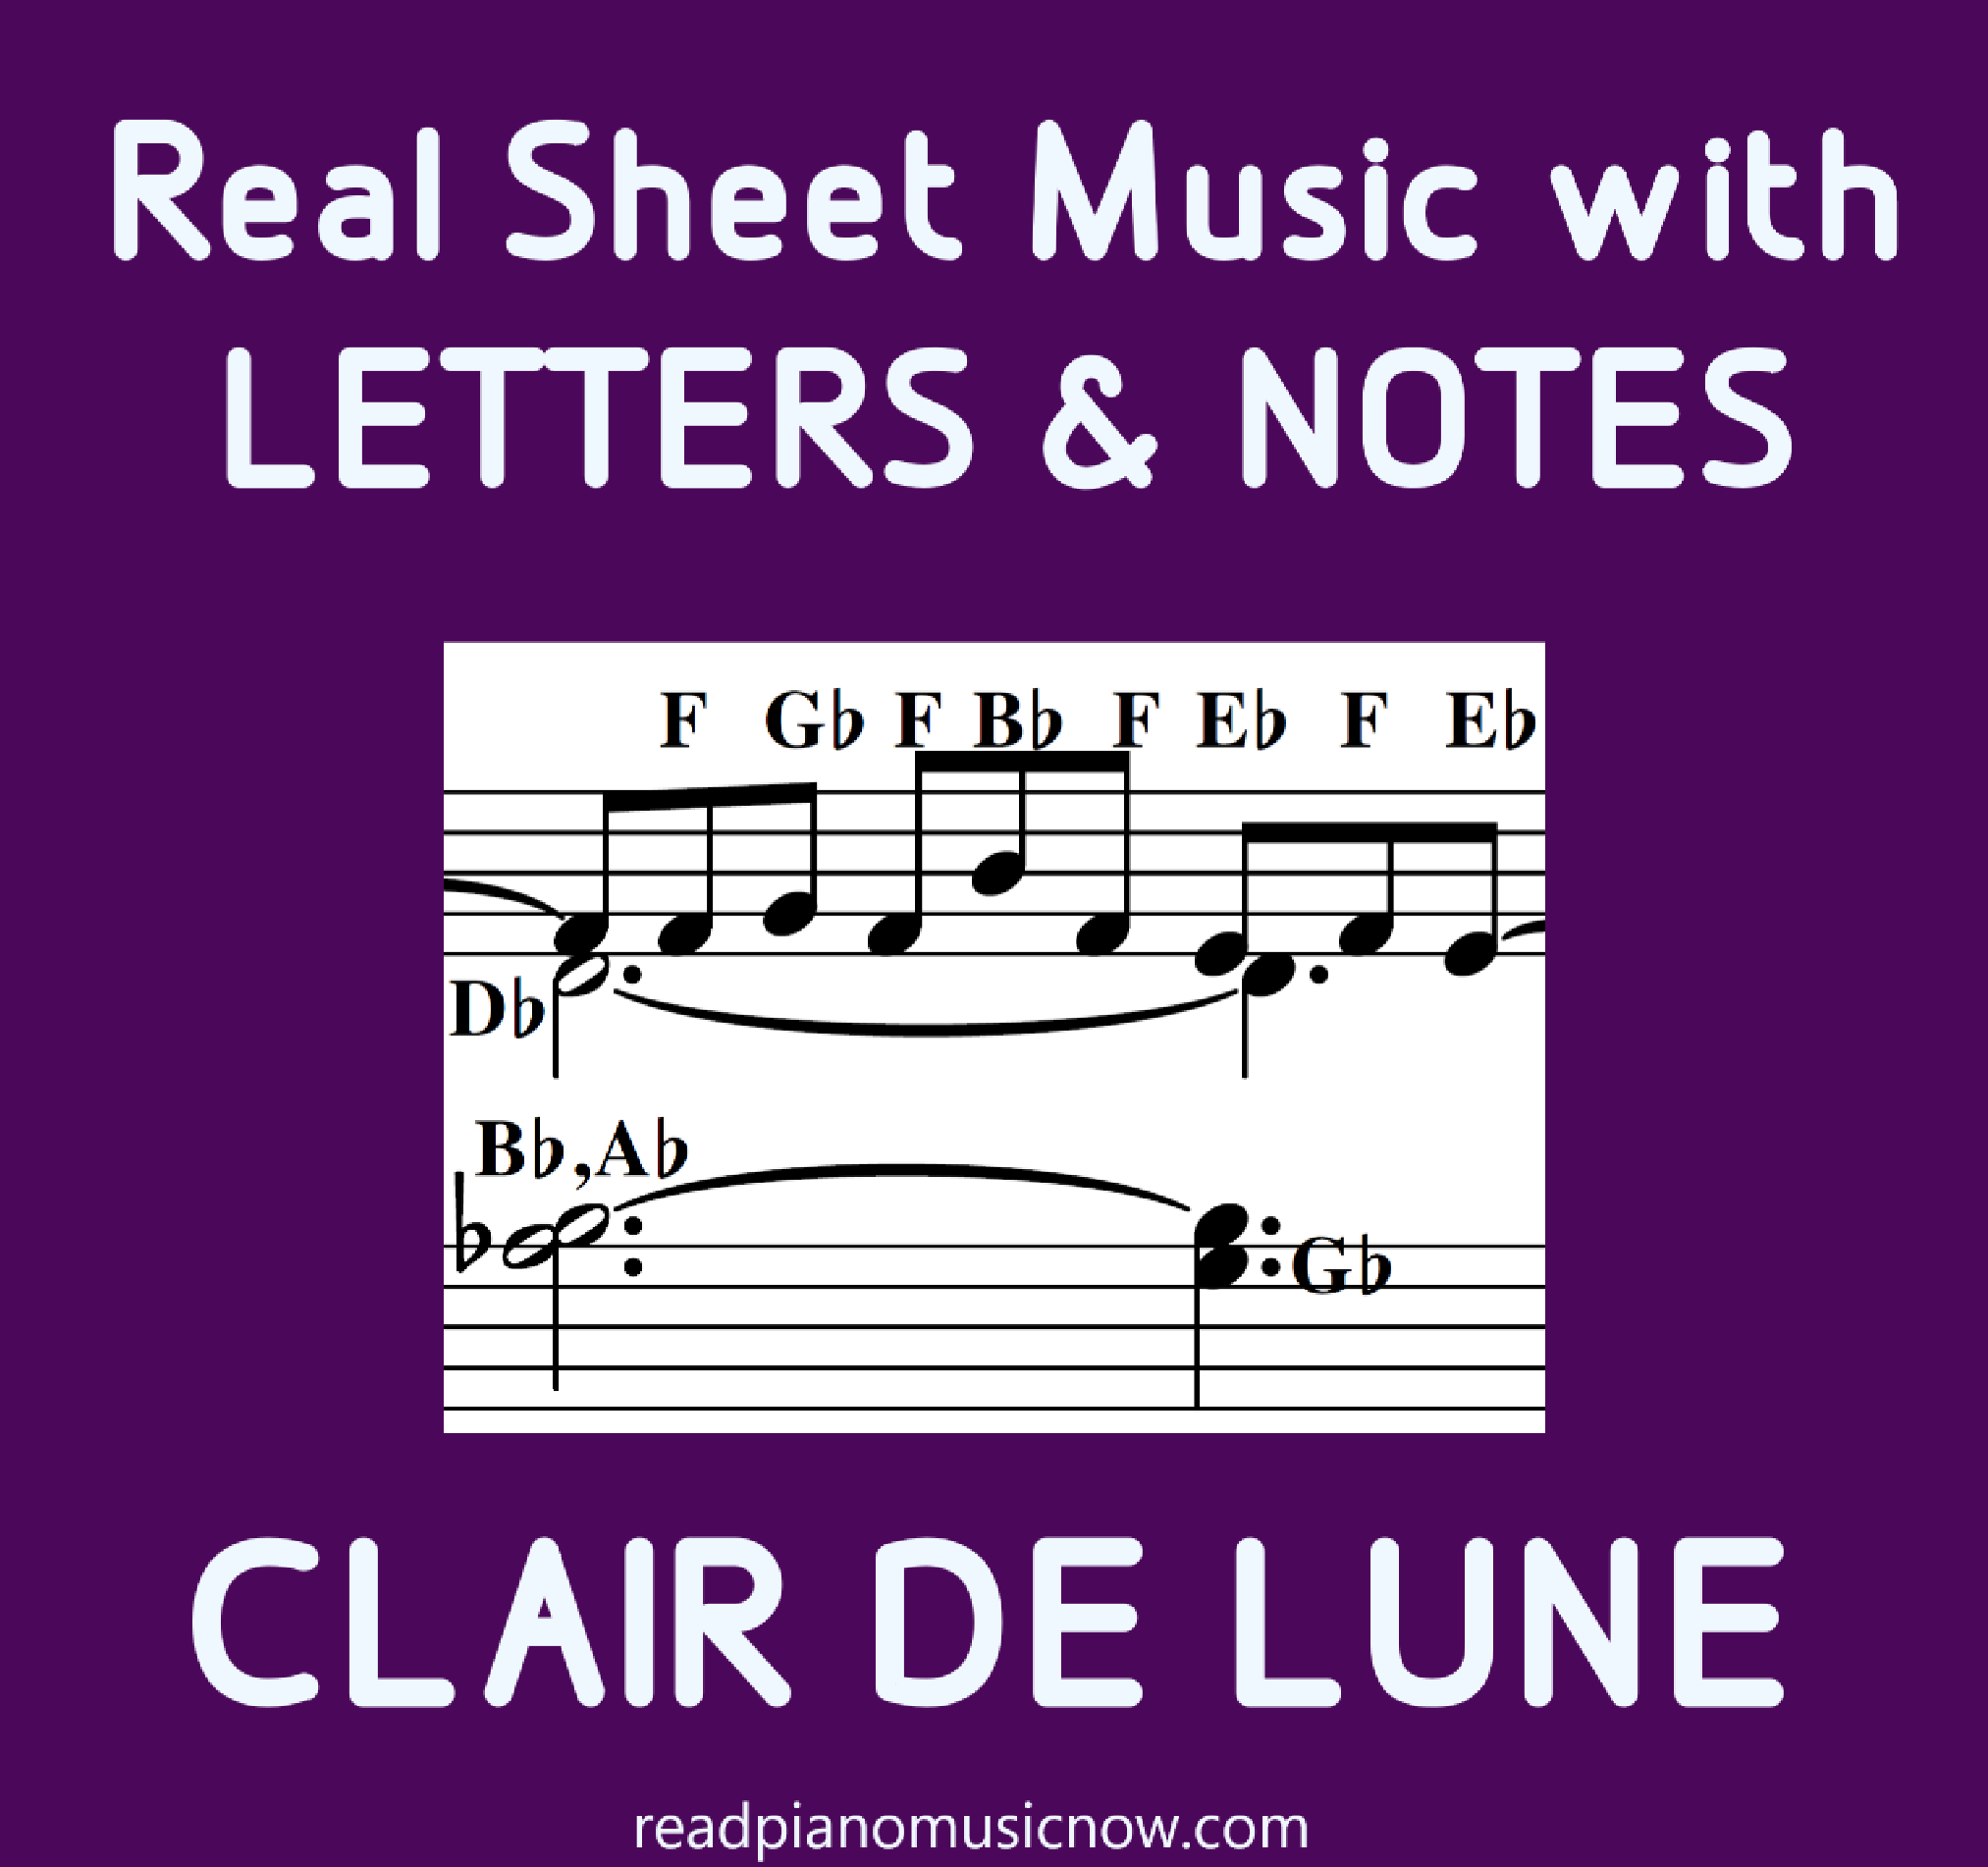 Clair de Lune sheet music with letters - product image.